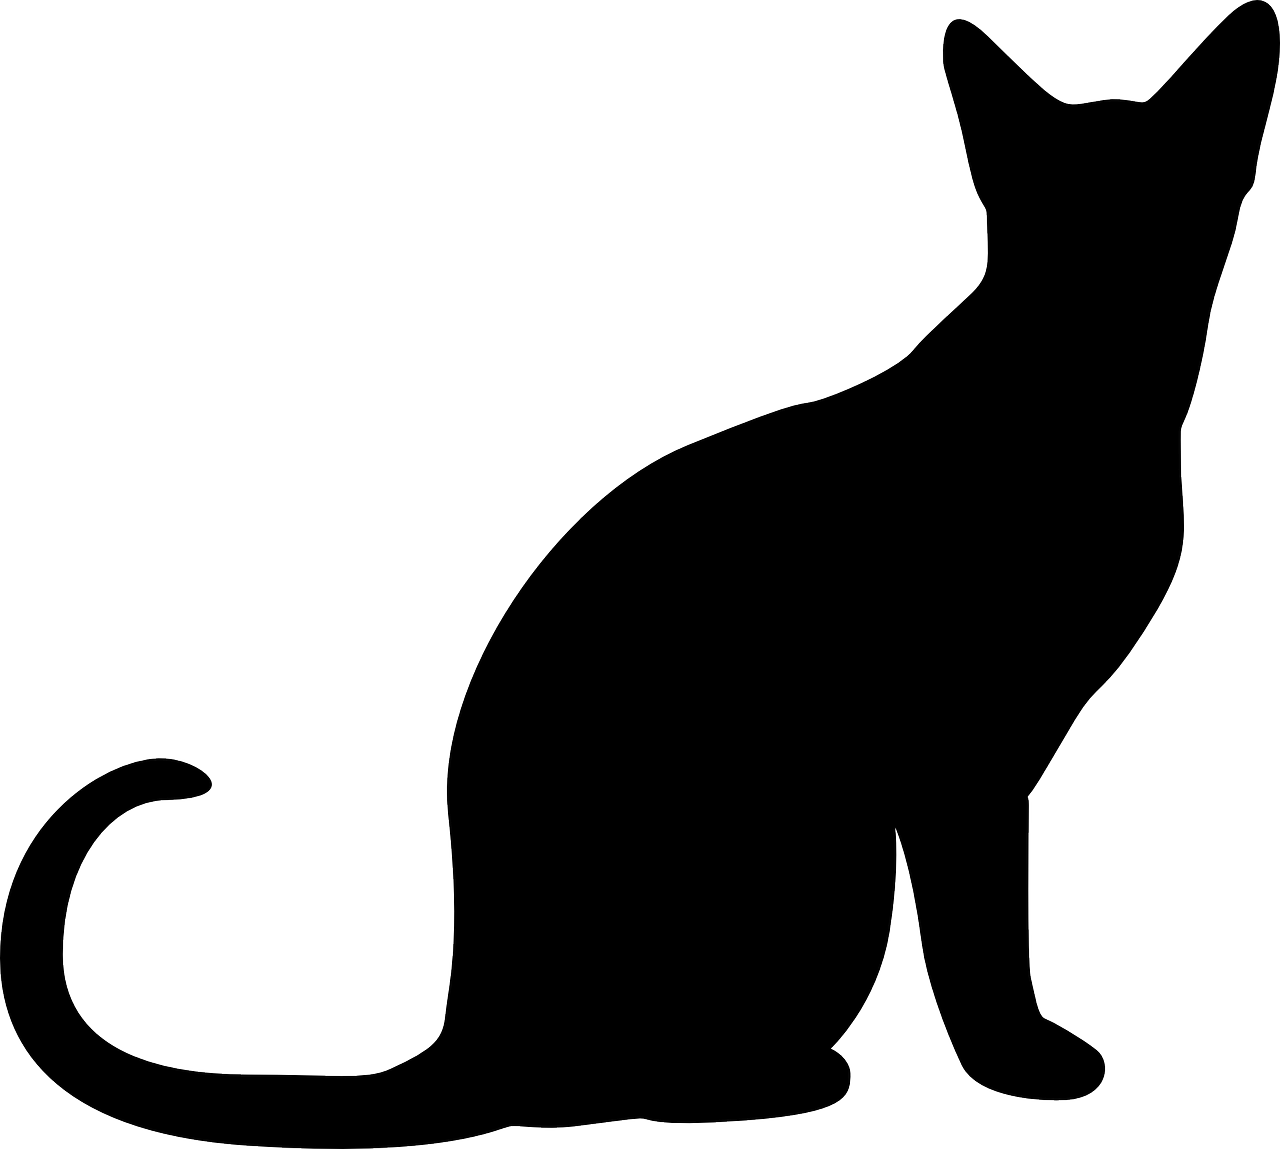 Download Cat,silhouette,simple,sitting,free vector graphics - free image from needpix.com